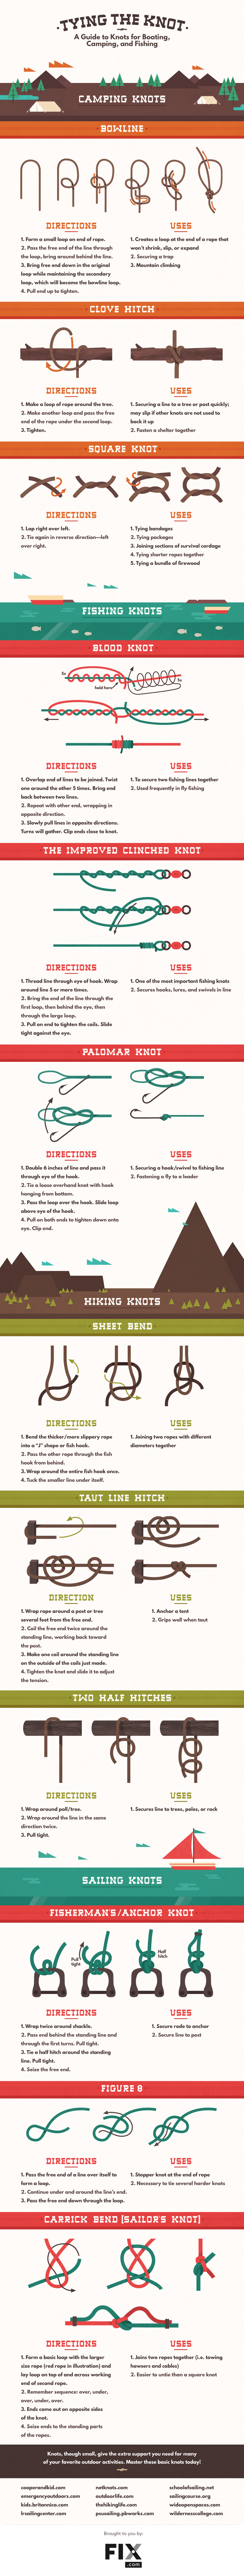 How to Tie Knots: Tying Different Types of Knots with Illustrations